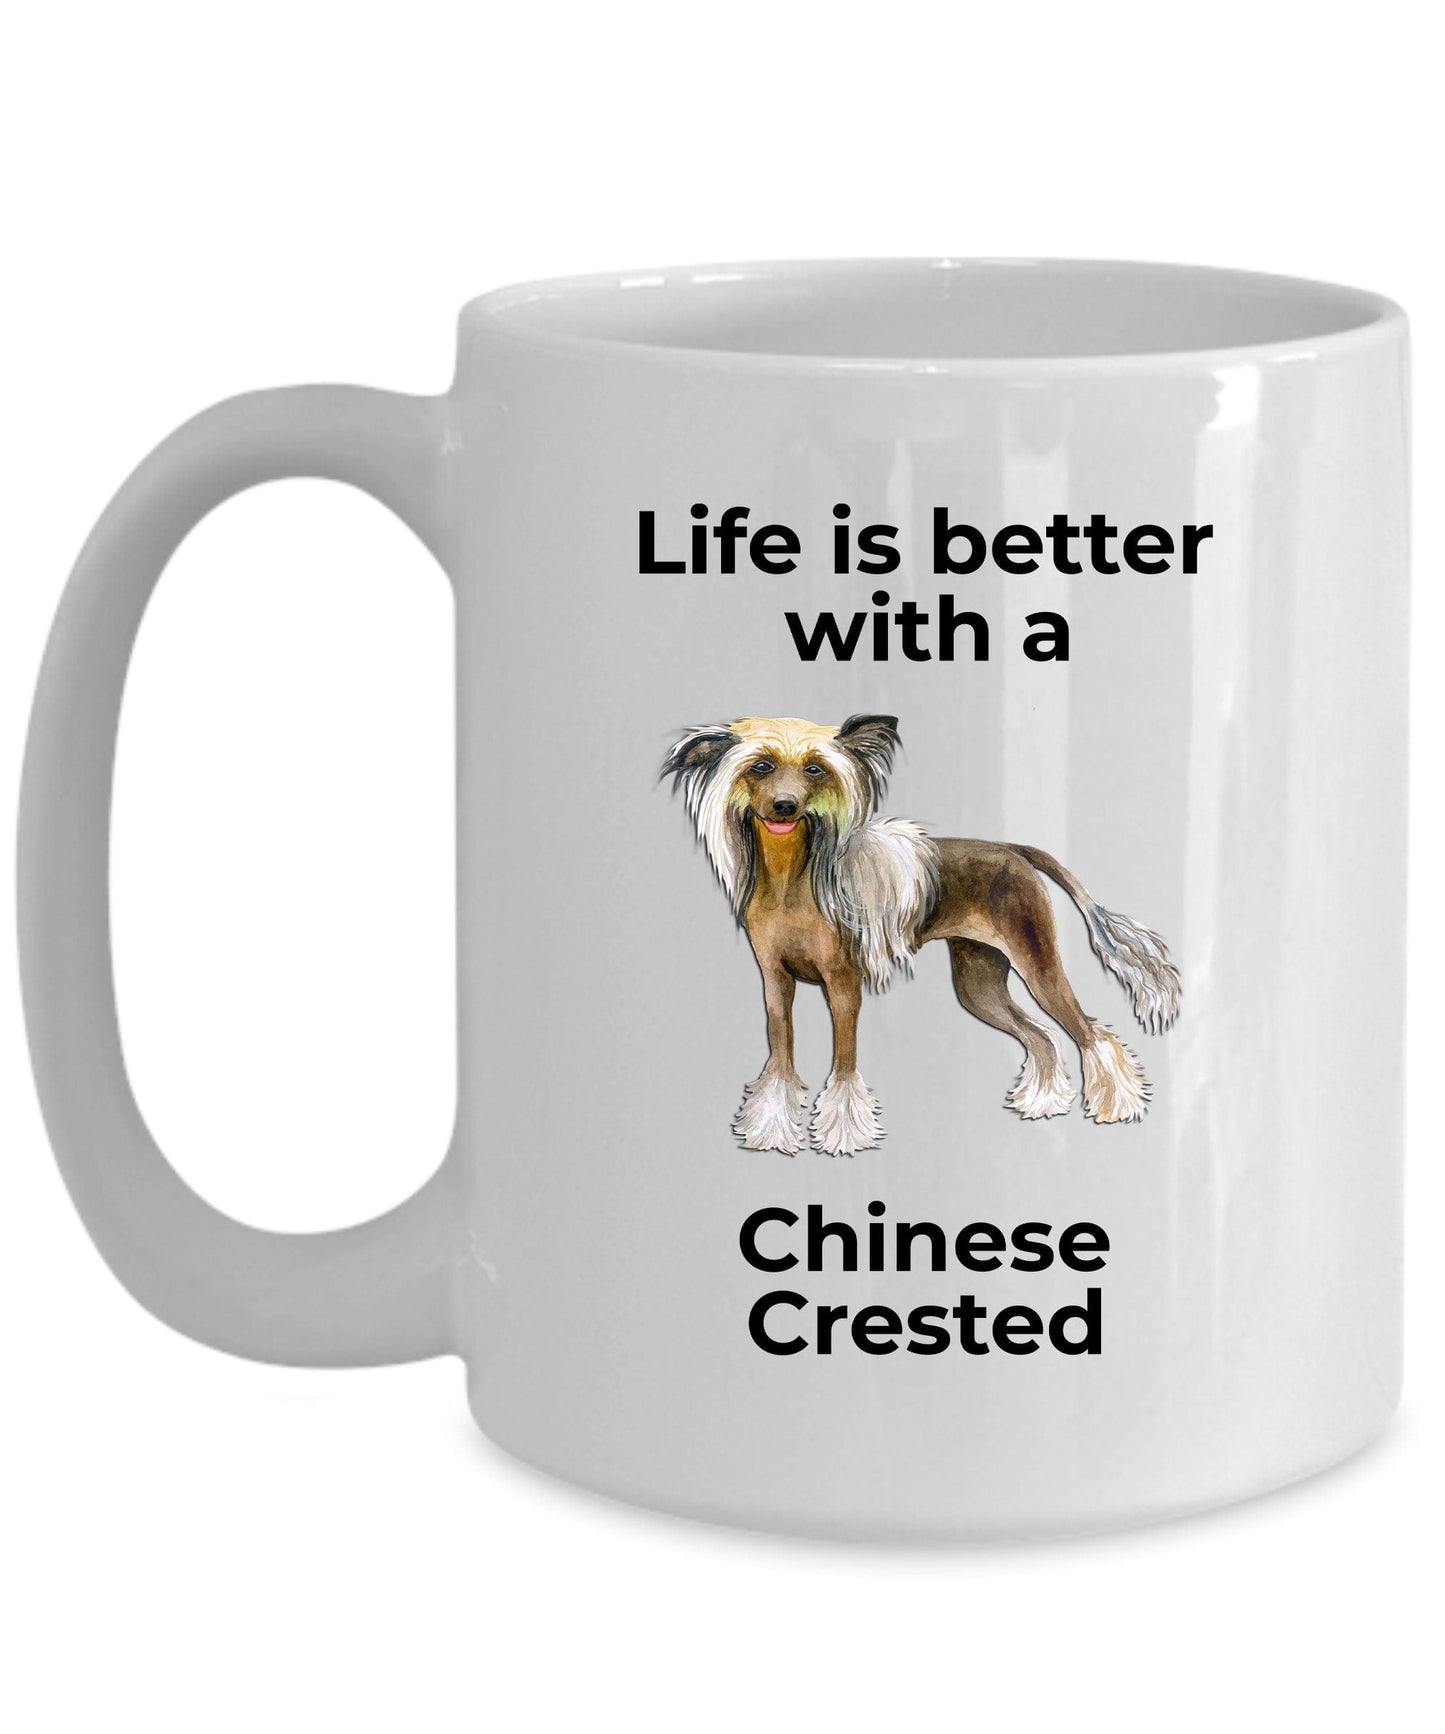 Chinese Crested Dog Lover ceramic coffee mug - Life is better with a Chinese Crested